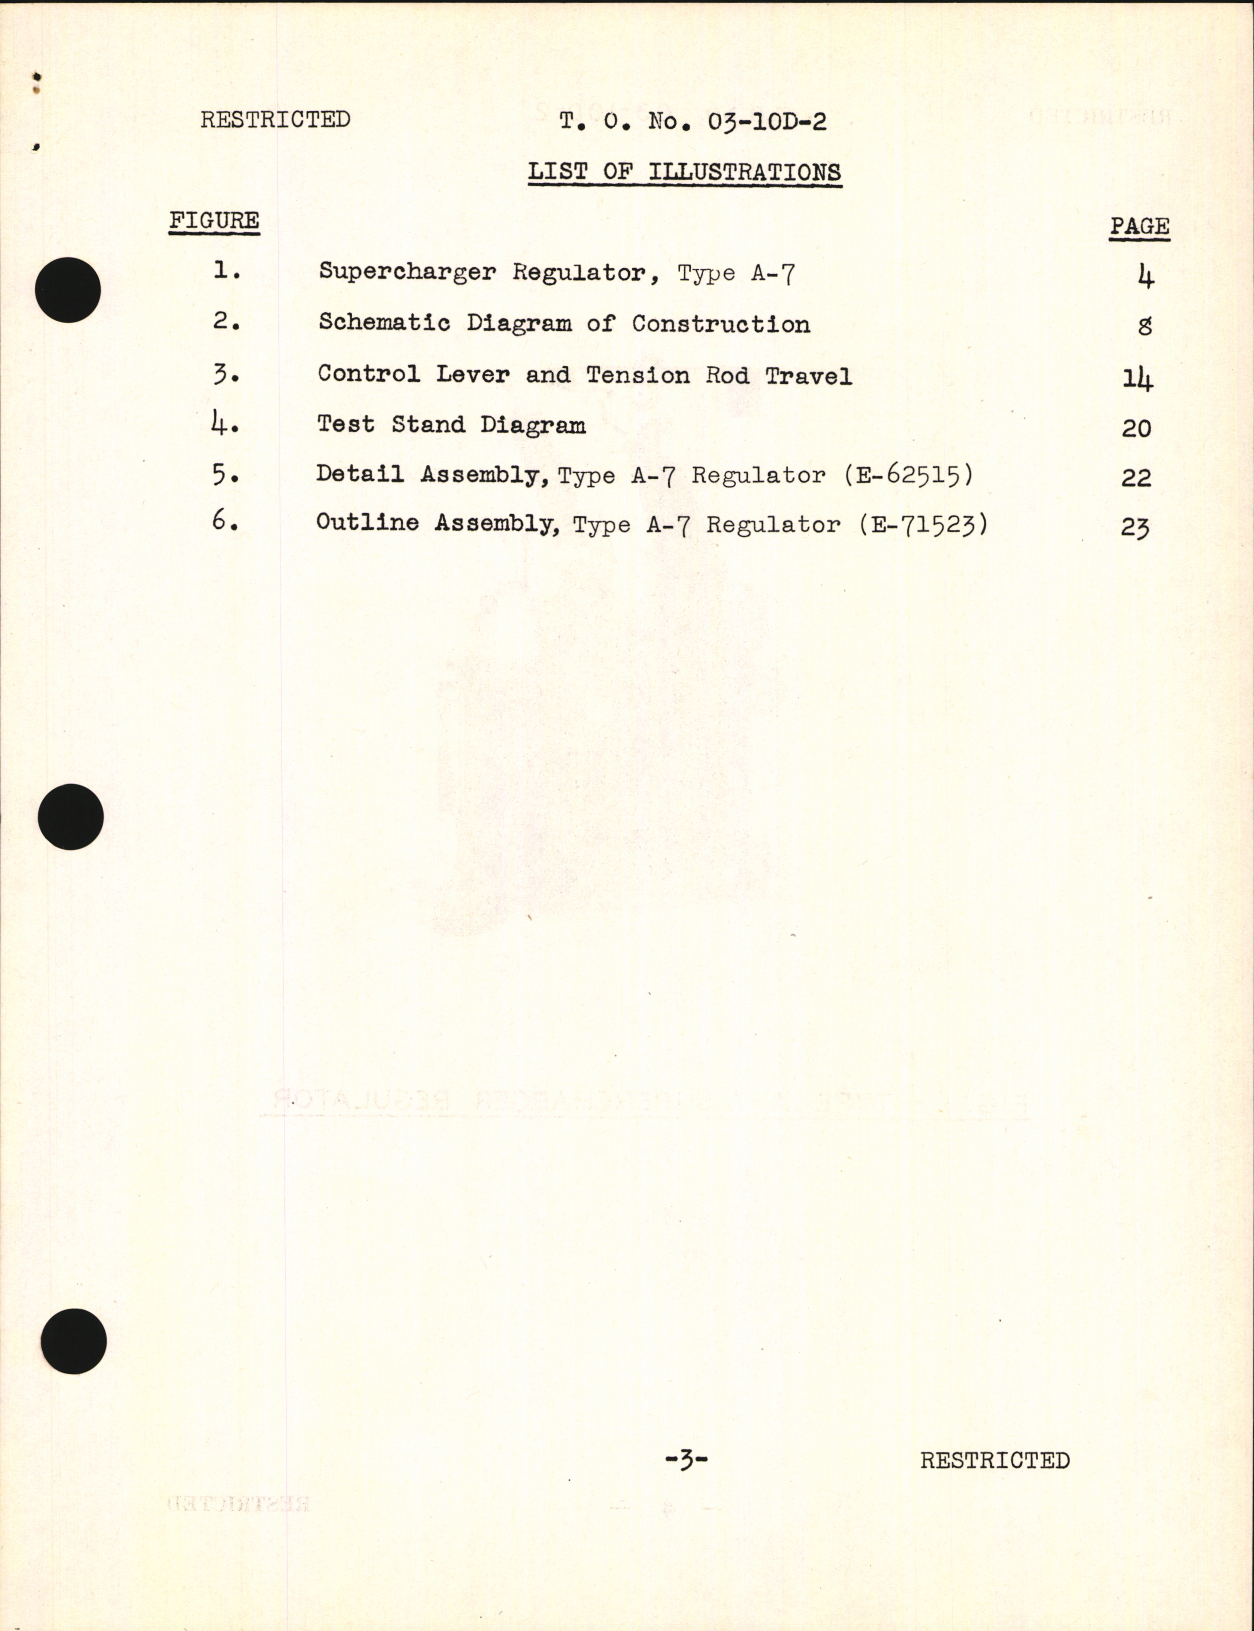 Sample page 5 from AirCorps Library document: Preliminary Handbook of Instructions for Type A-7 Supercharger Regulator